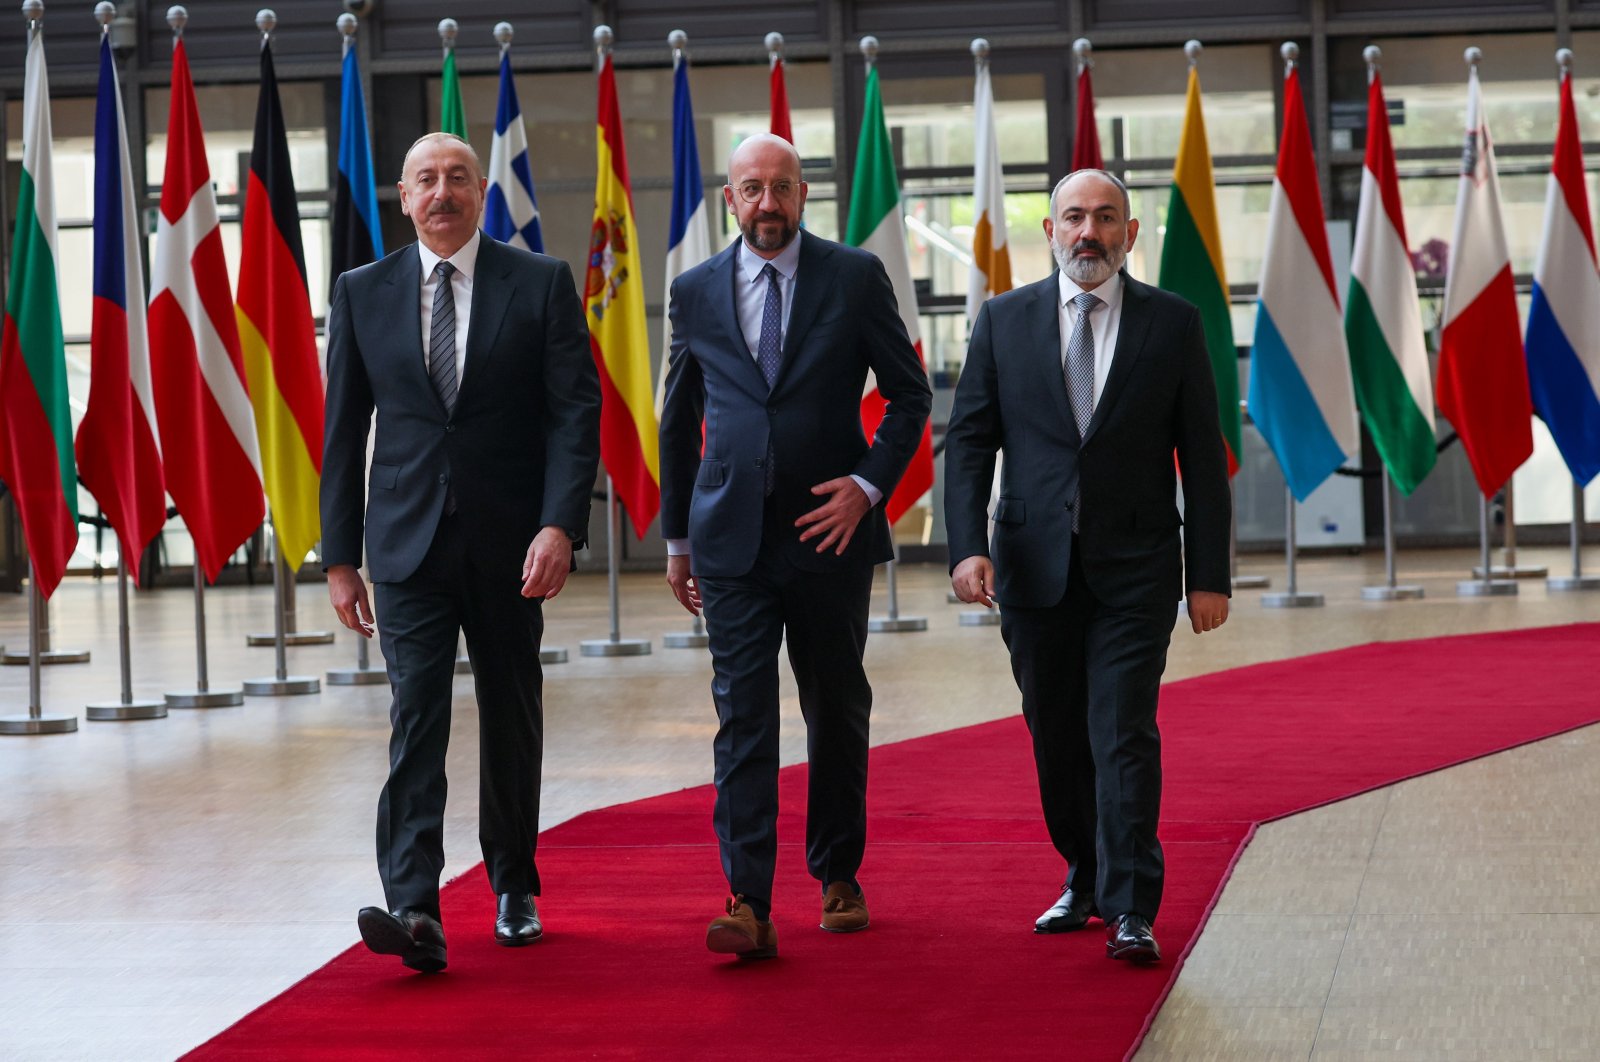 Azerbaijan&#039;s President Ilham Aliyev (L) and Armenian Prime Minister Nikol Pashinyan (R) are accompanied by the President of the European Council, Charles Michel, as they arrive prior to their meeting in Brussels, Belgium, May 14, 2023. (EPA Photo)